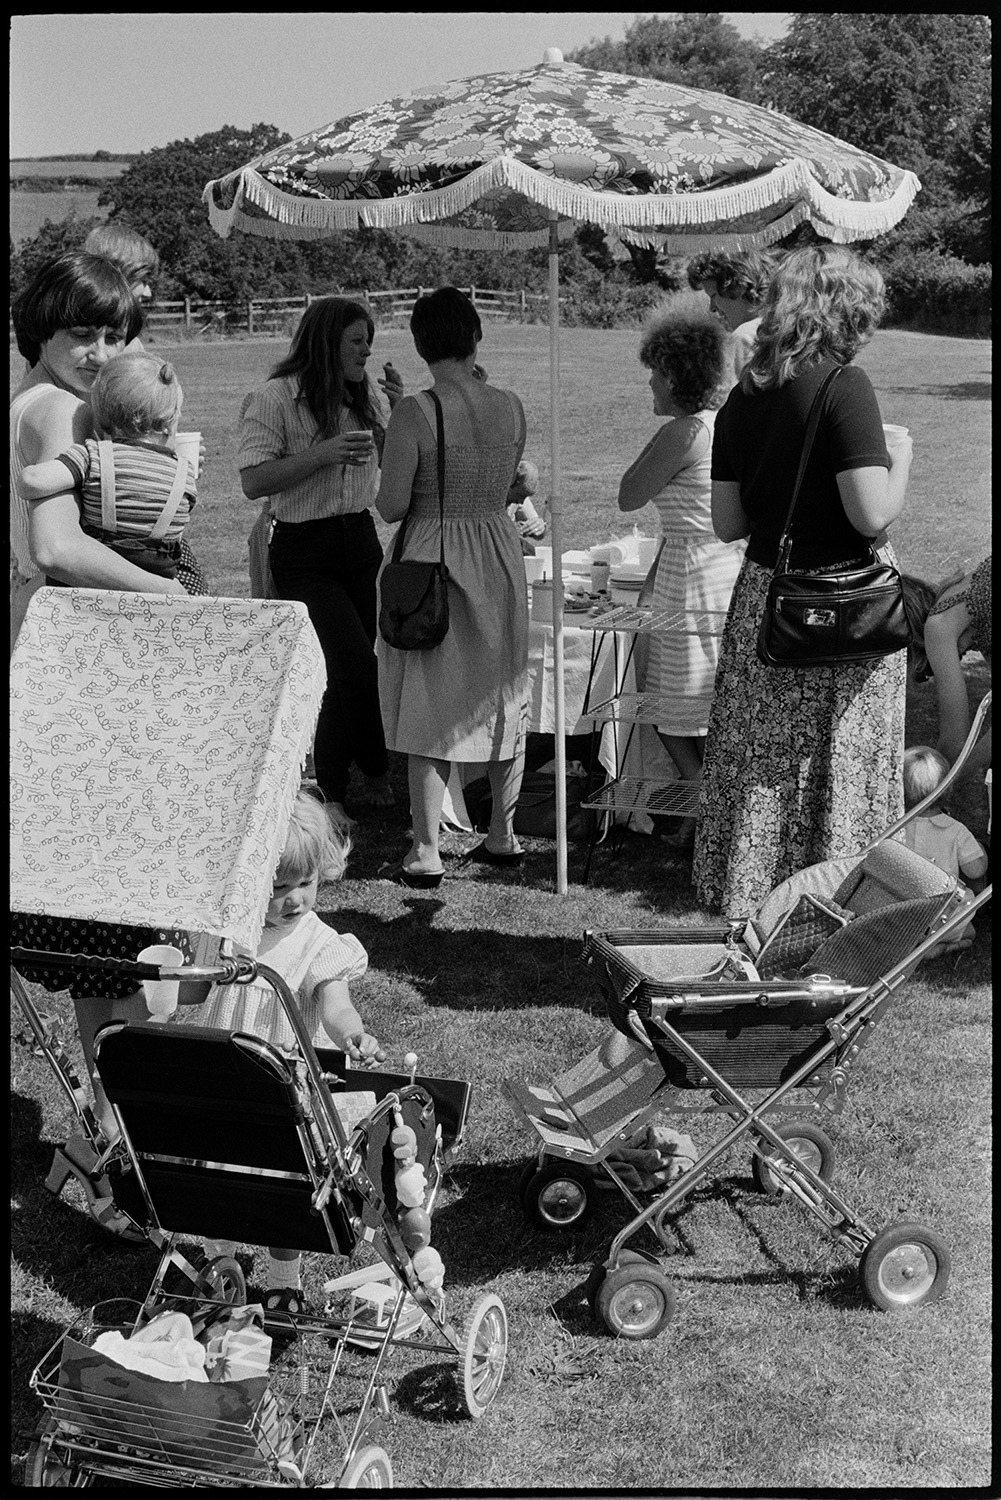 Sports day, women mothers with babies, children chatting and serving refreshments.
[Women chatting under a parasol covering a refreshment table at Dolton Sports Day, with pushchairs and children in the foreground.]